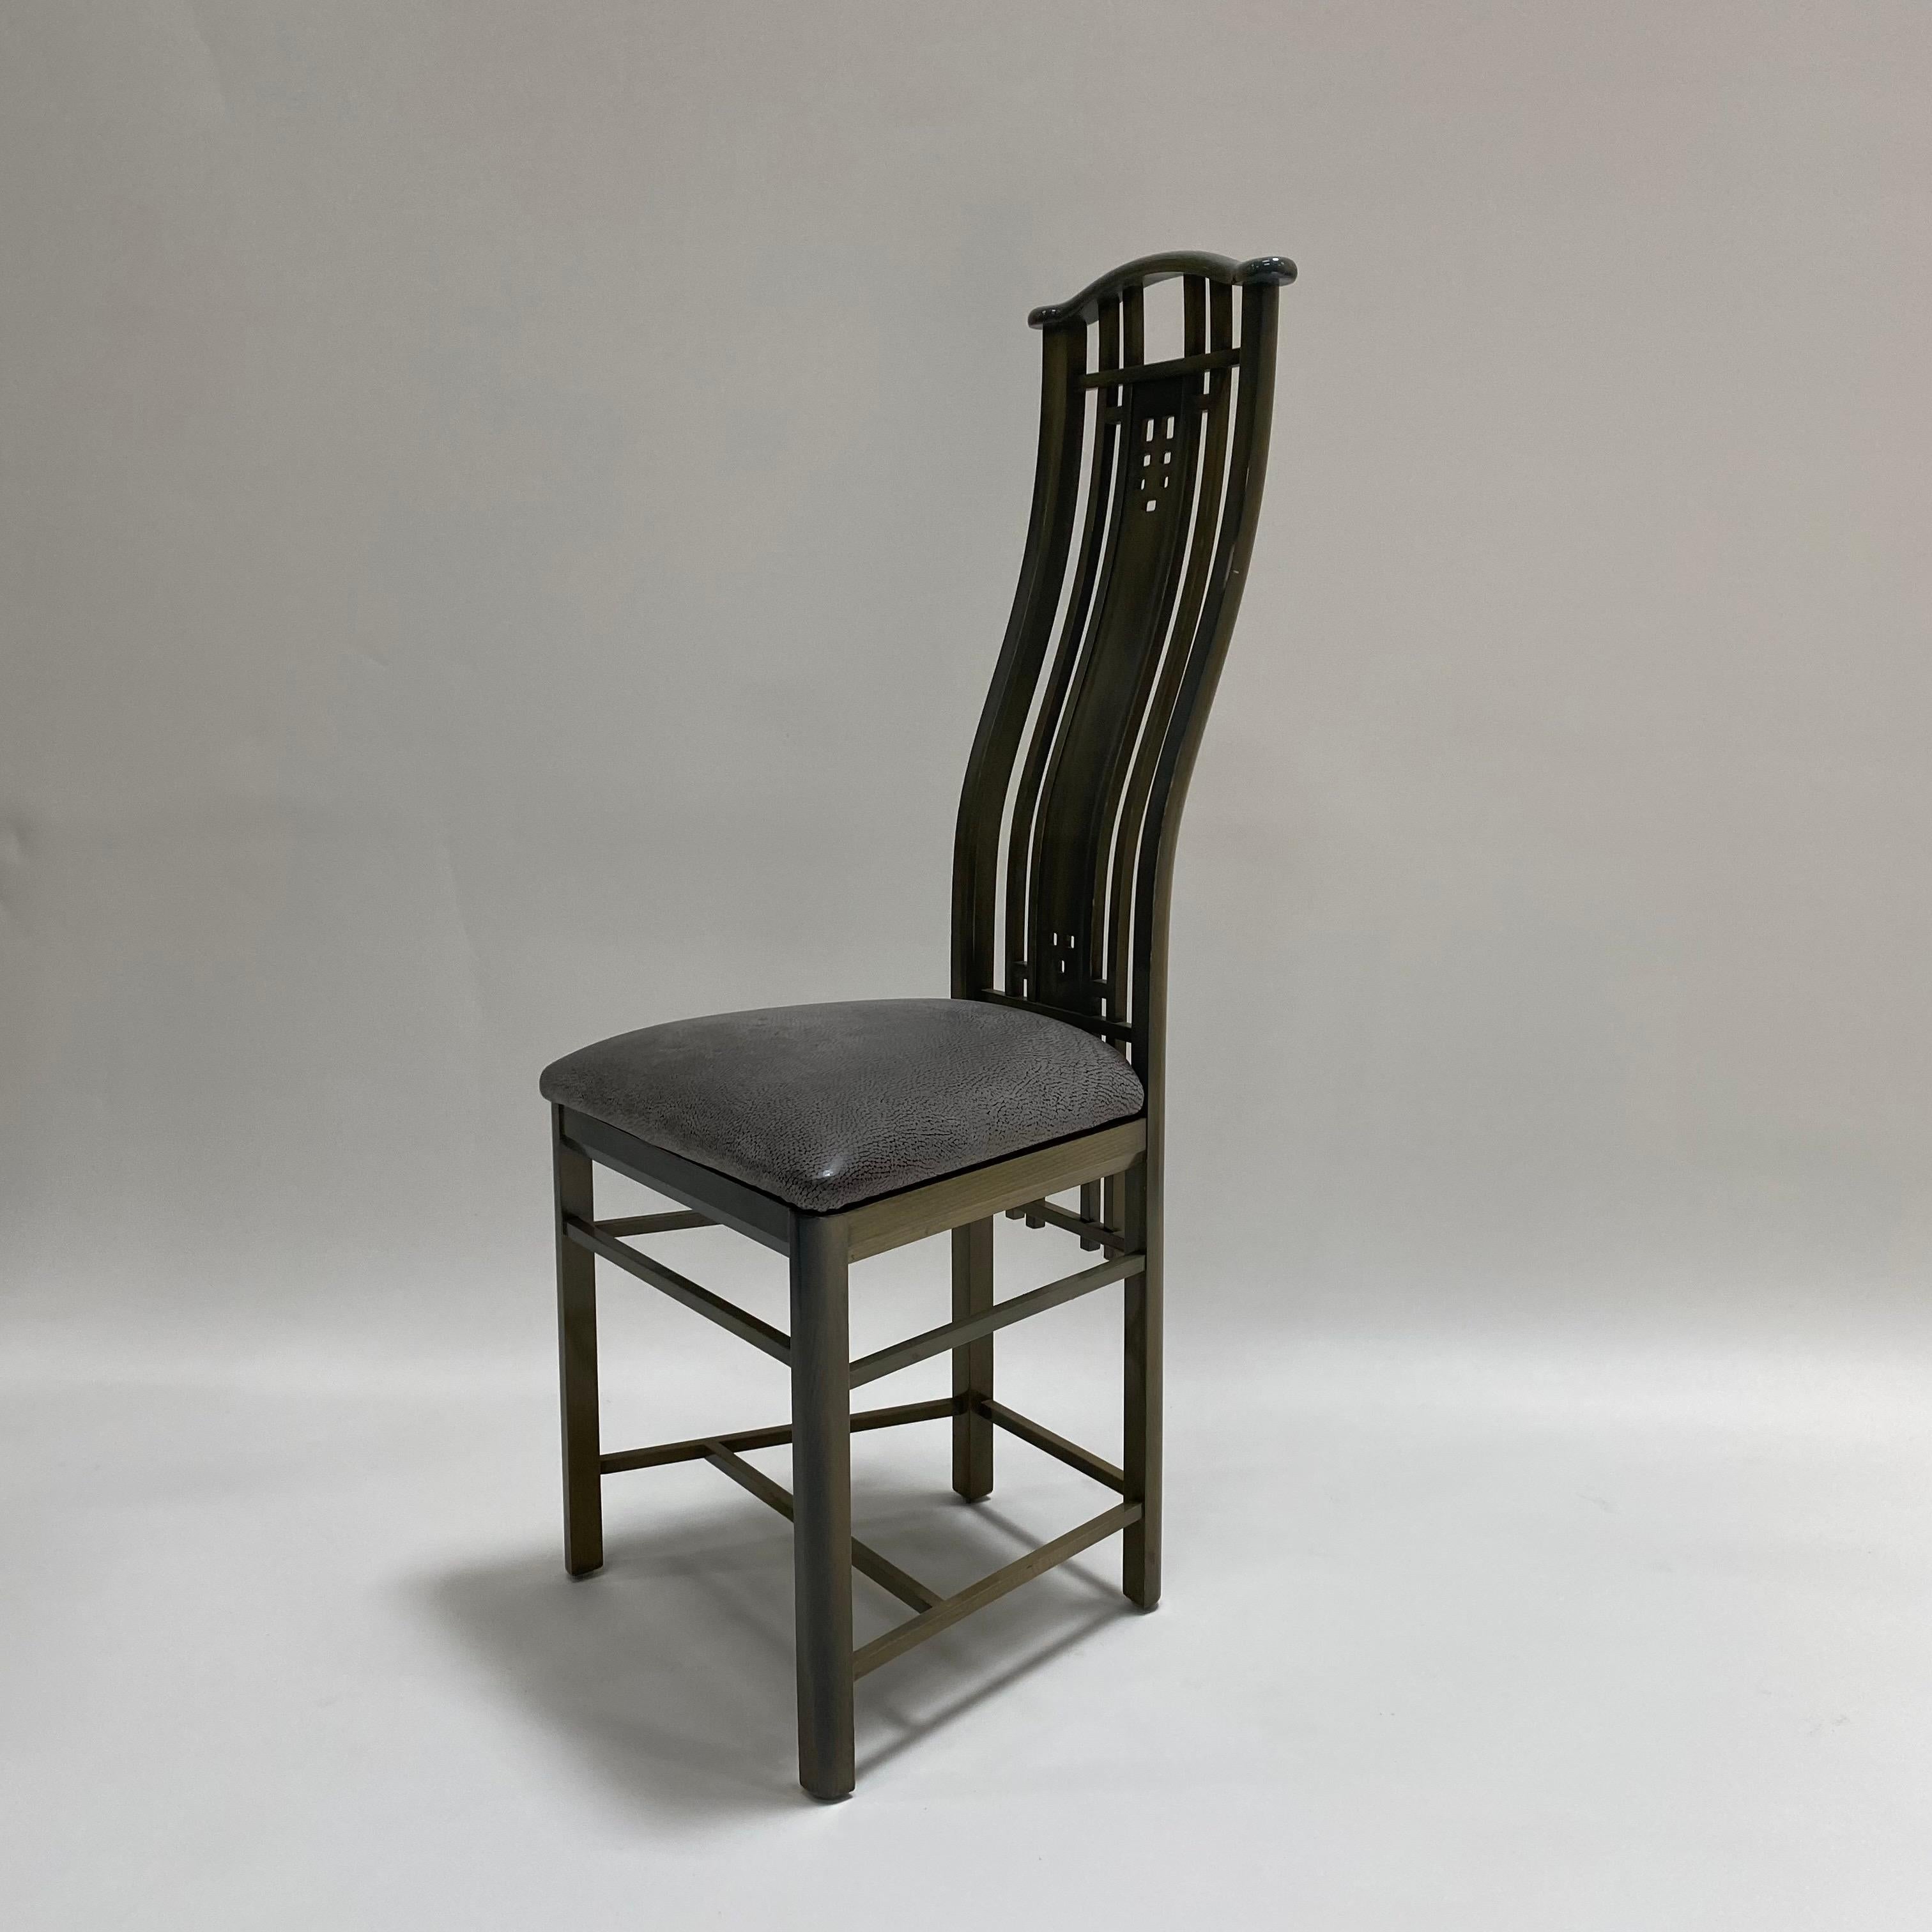 Set of 4 High Back Lacquered Dining Chairs by Umberto Asnago for Giorgetti, 1980 For Sale 2